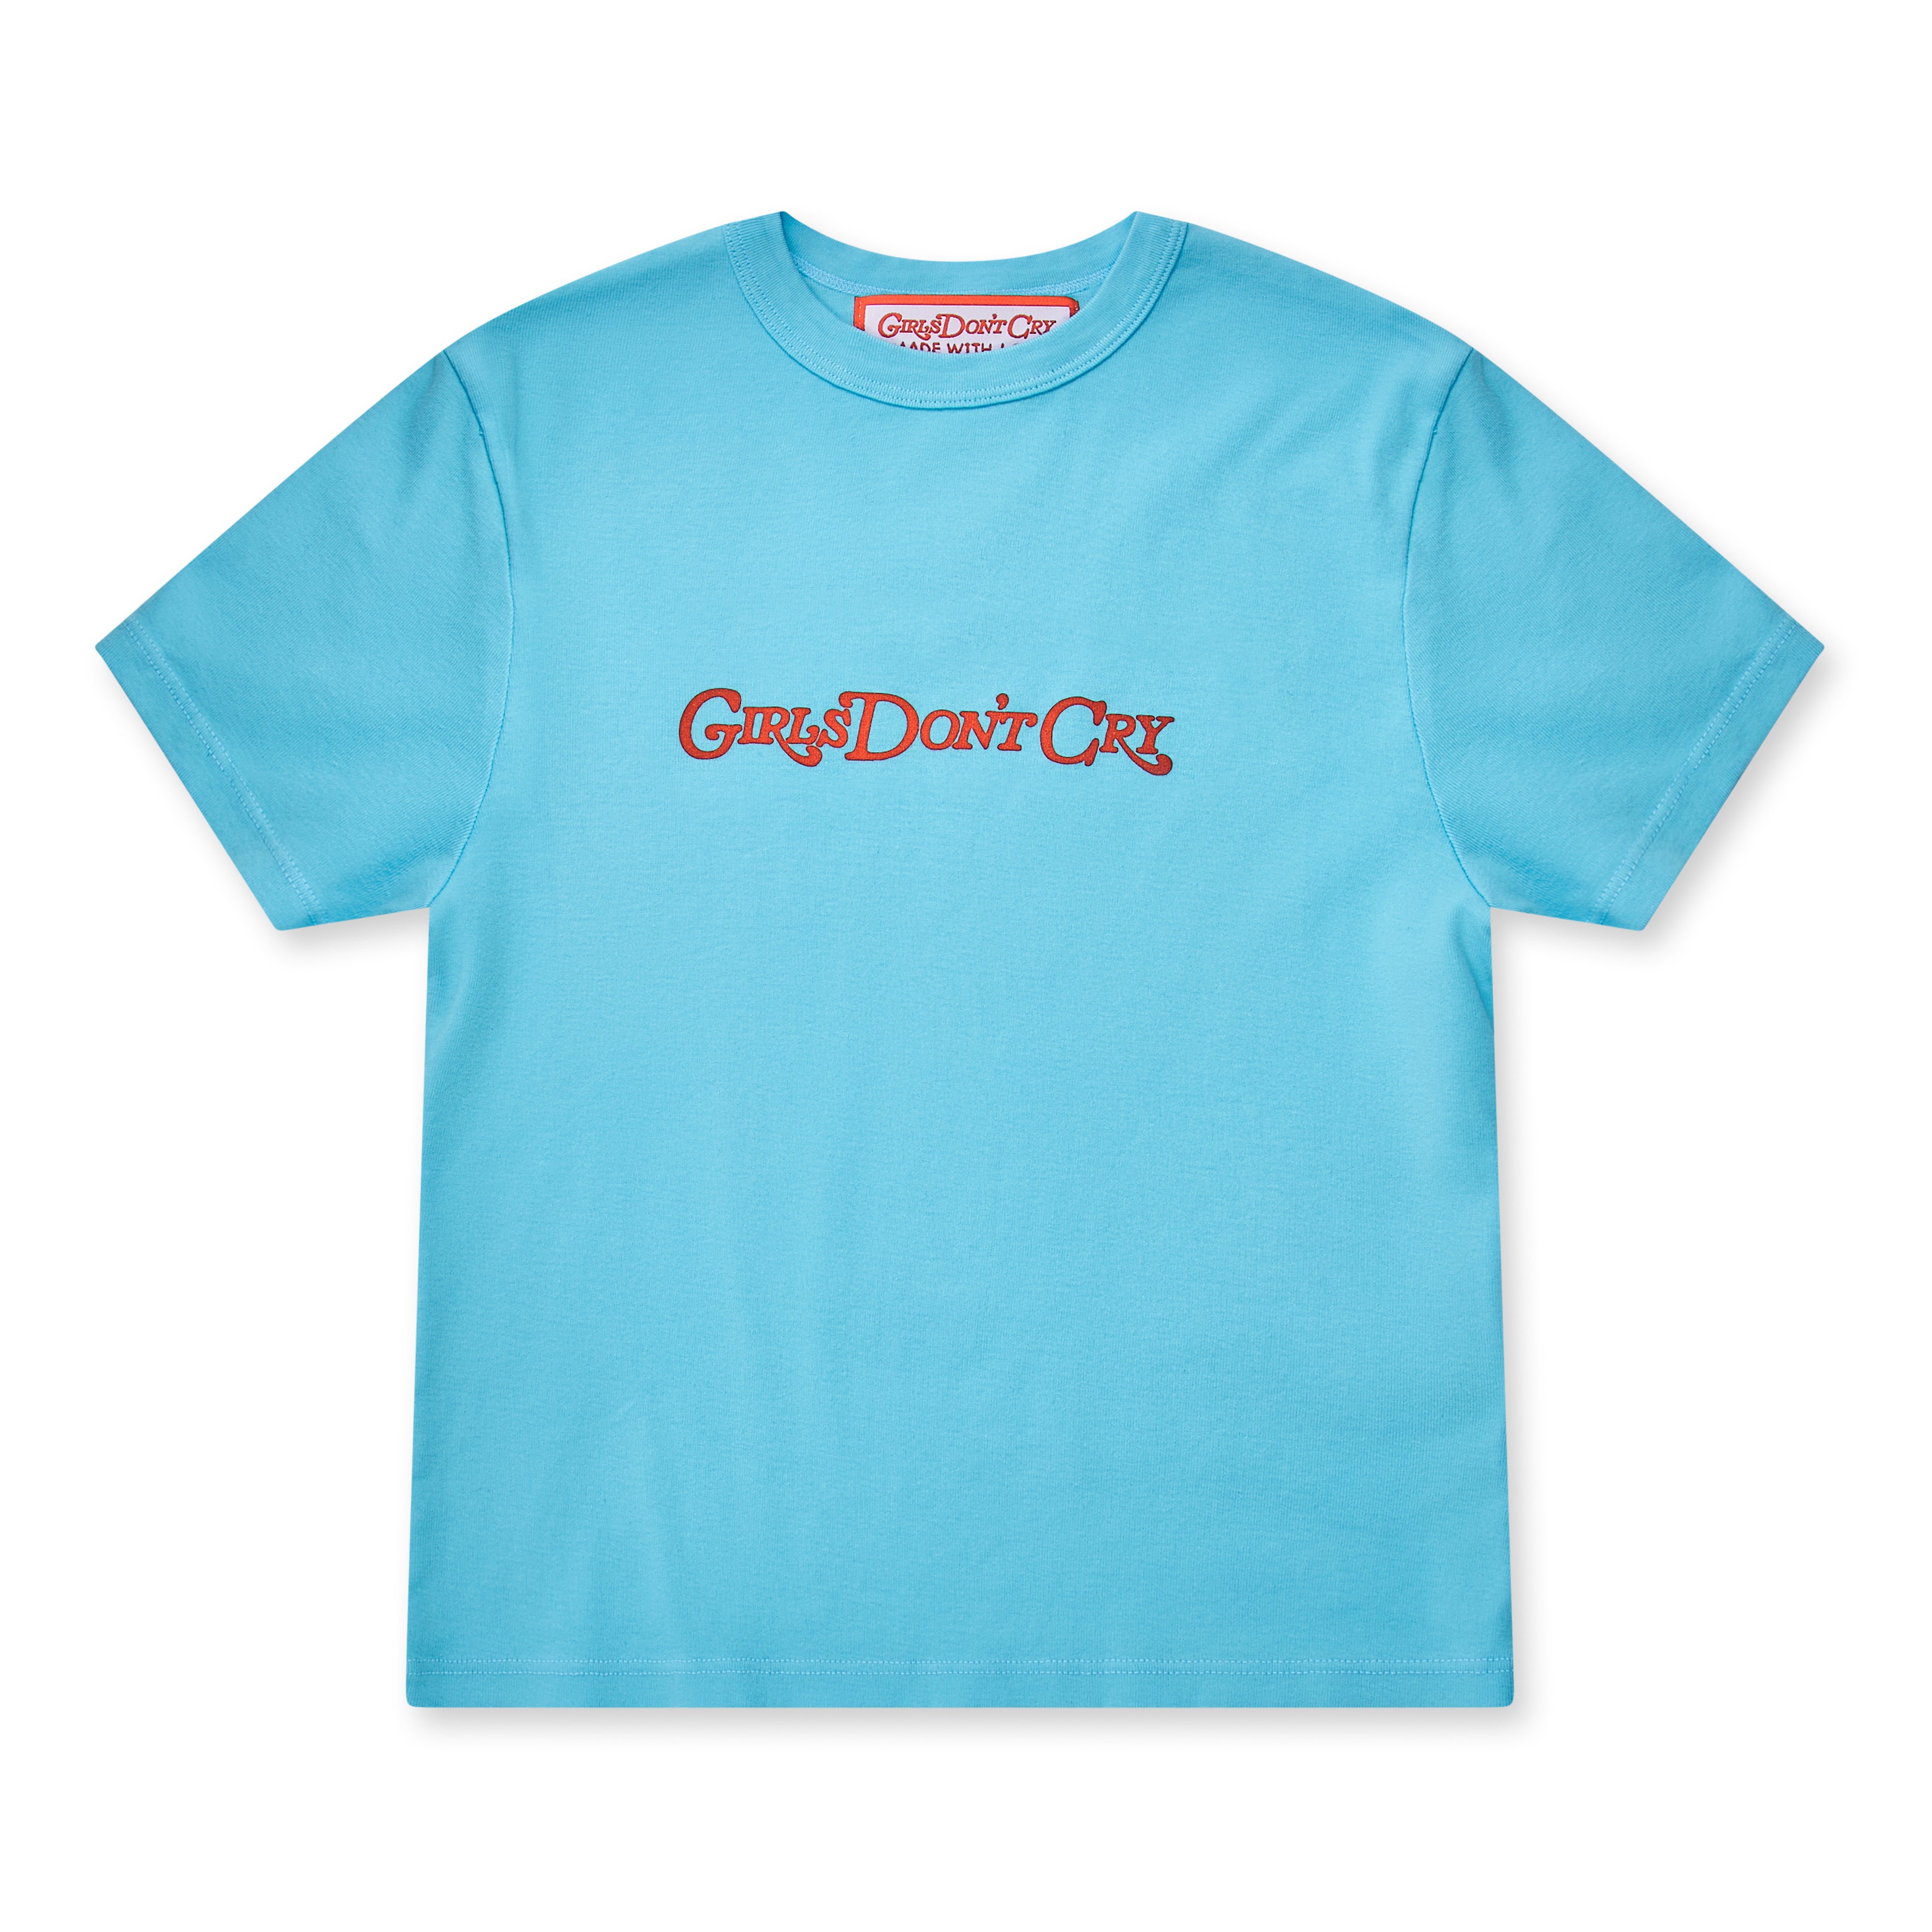 Girls Don't Cry - GDC Wordmark Baby T-Shirt - (Baby Blue) – DSMNY E-SHOP